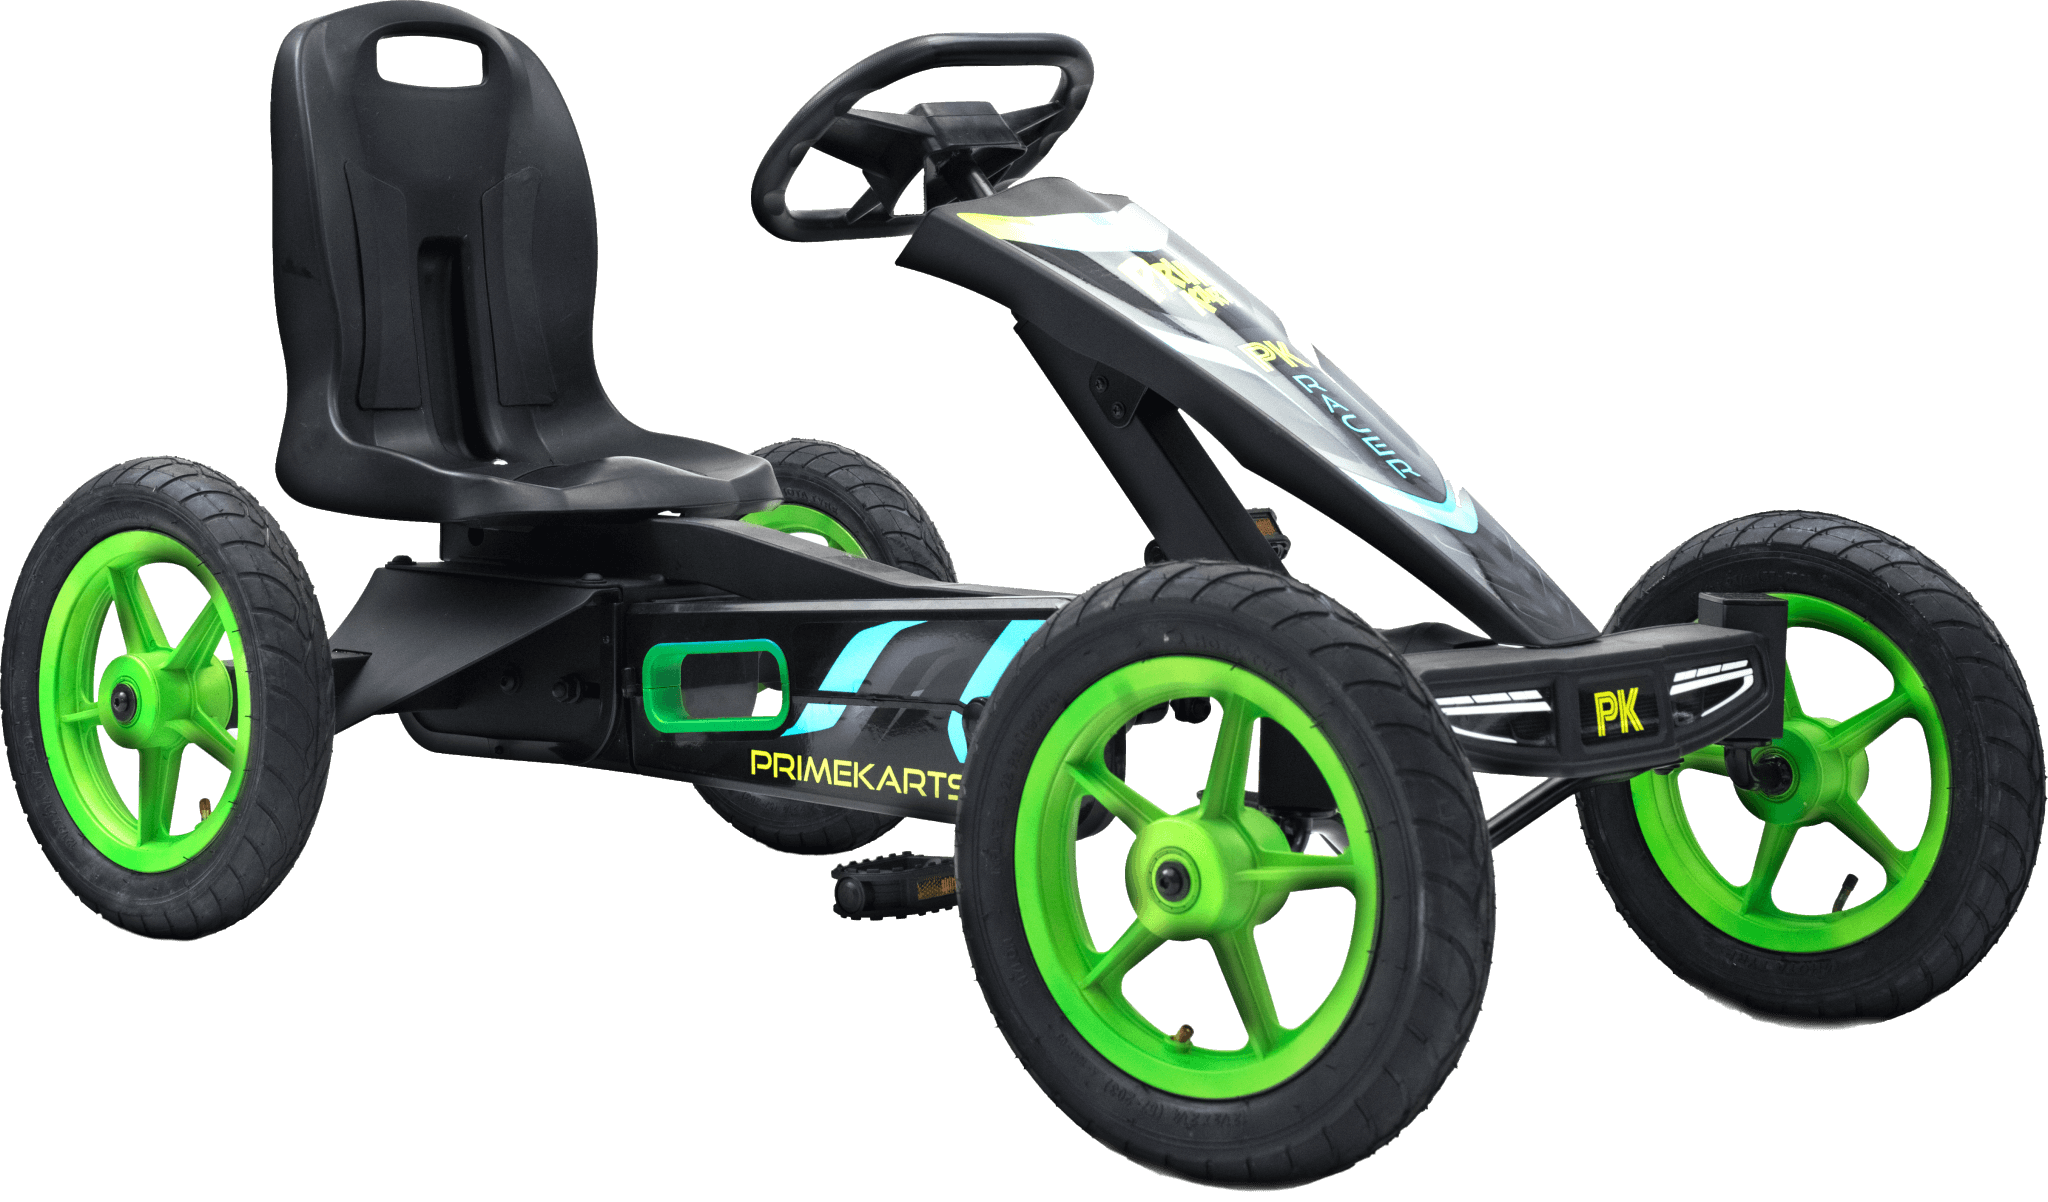 Prime Karts Are Designed And Built To The Highest Standards